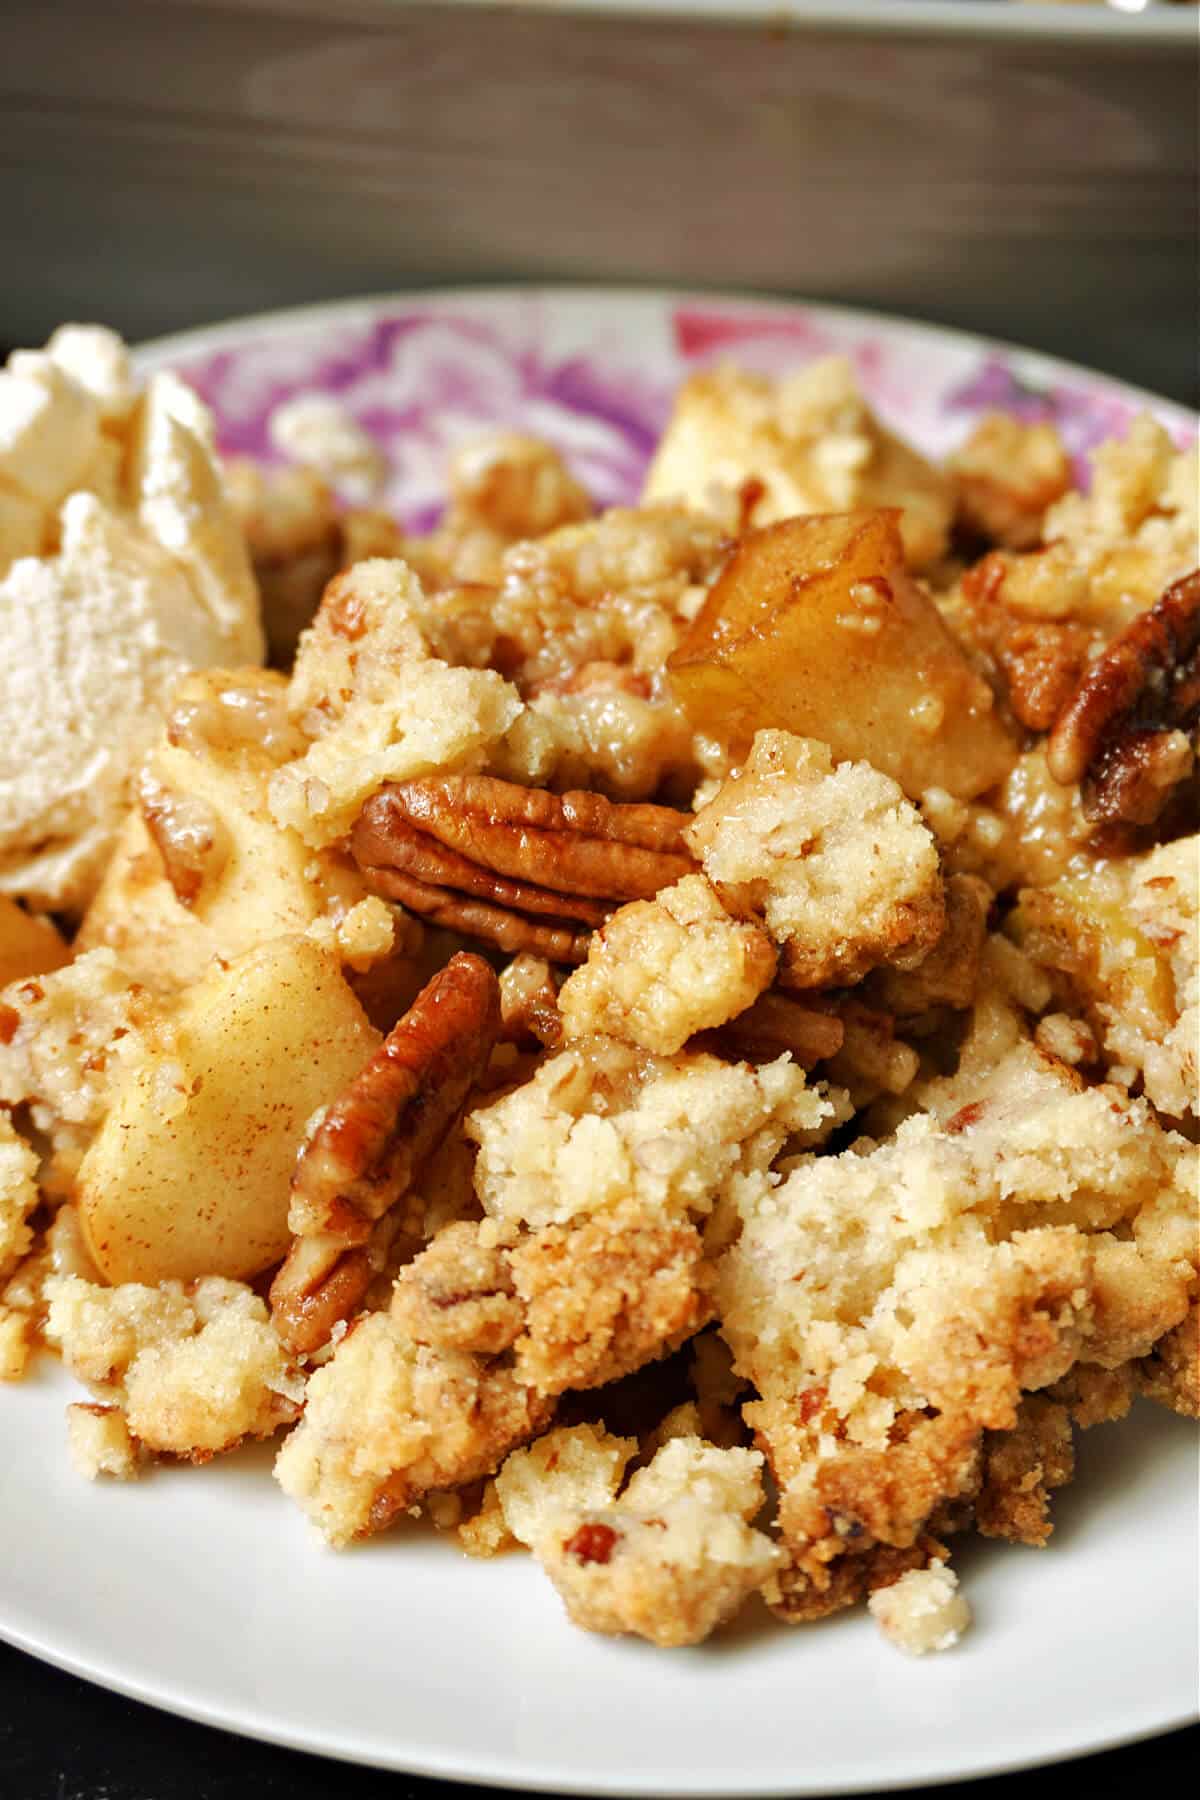 Close-up shoot of a pecan and apple crumble.